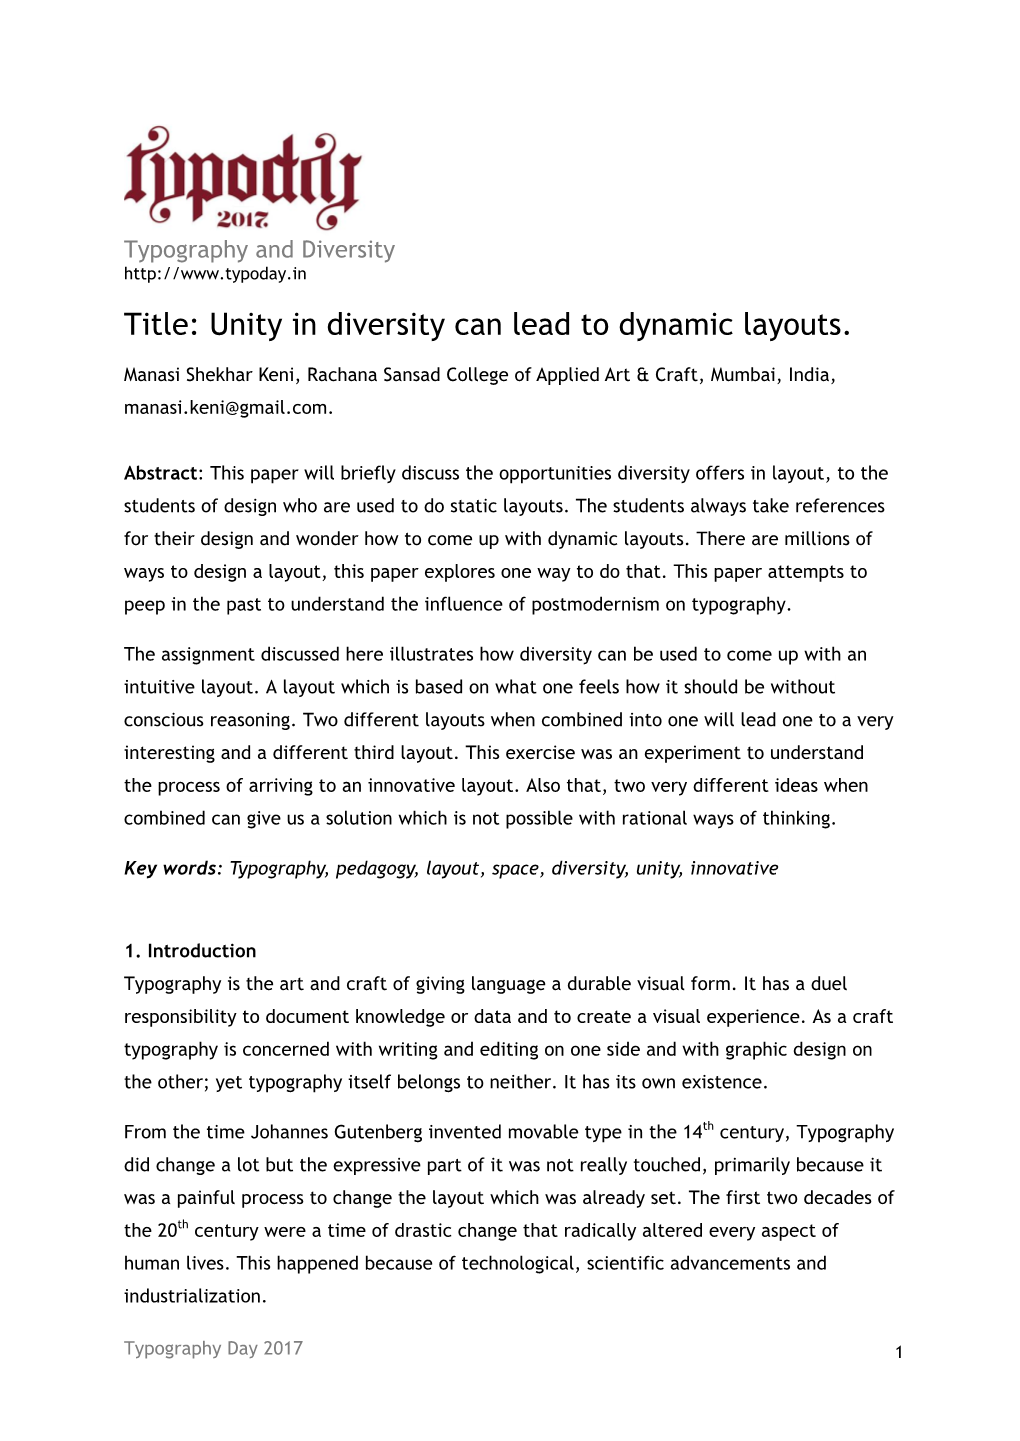 Title: Unity in Diversity Can Lead to Dynamic Layouts